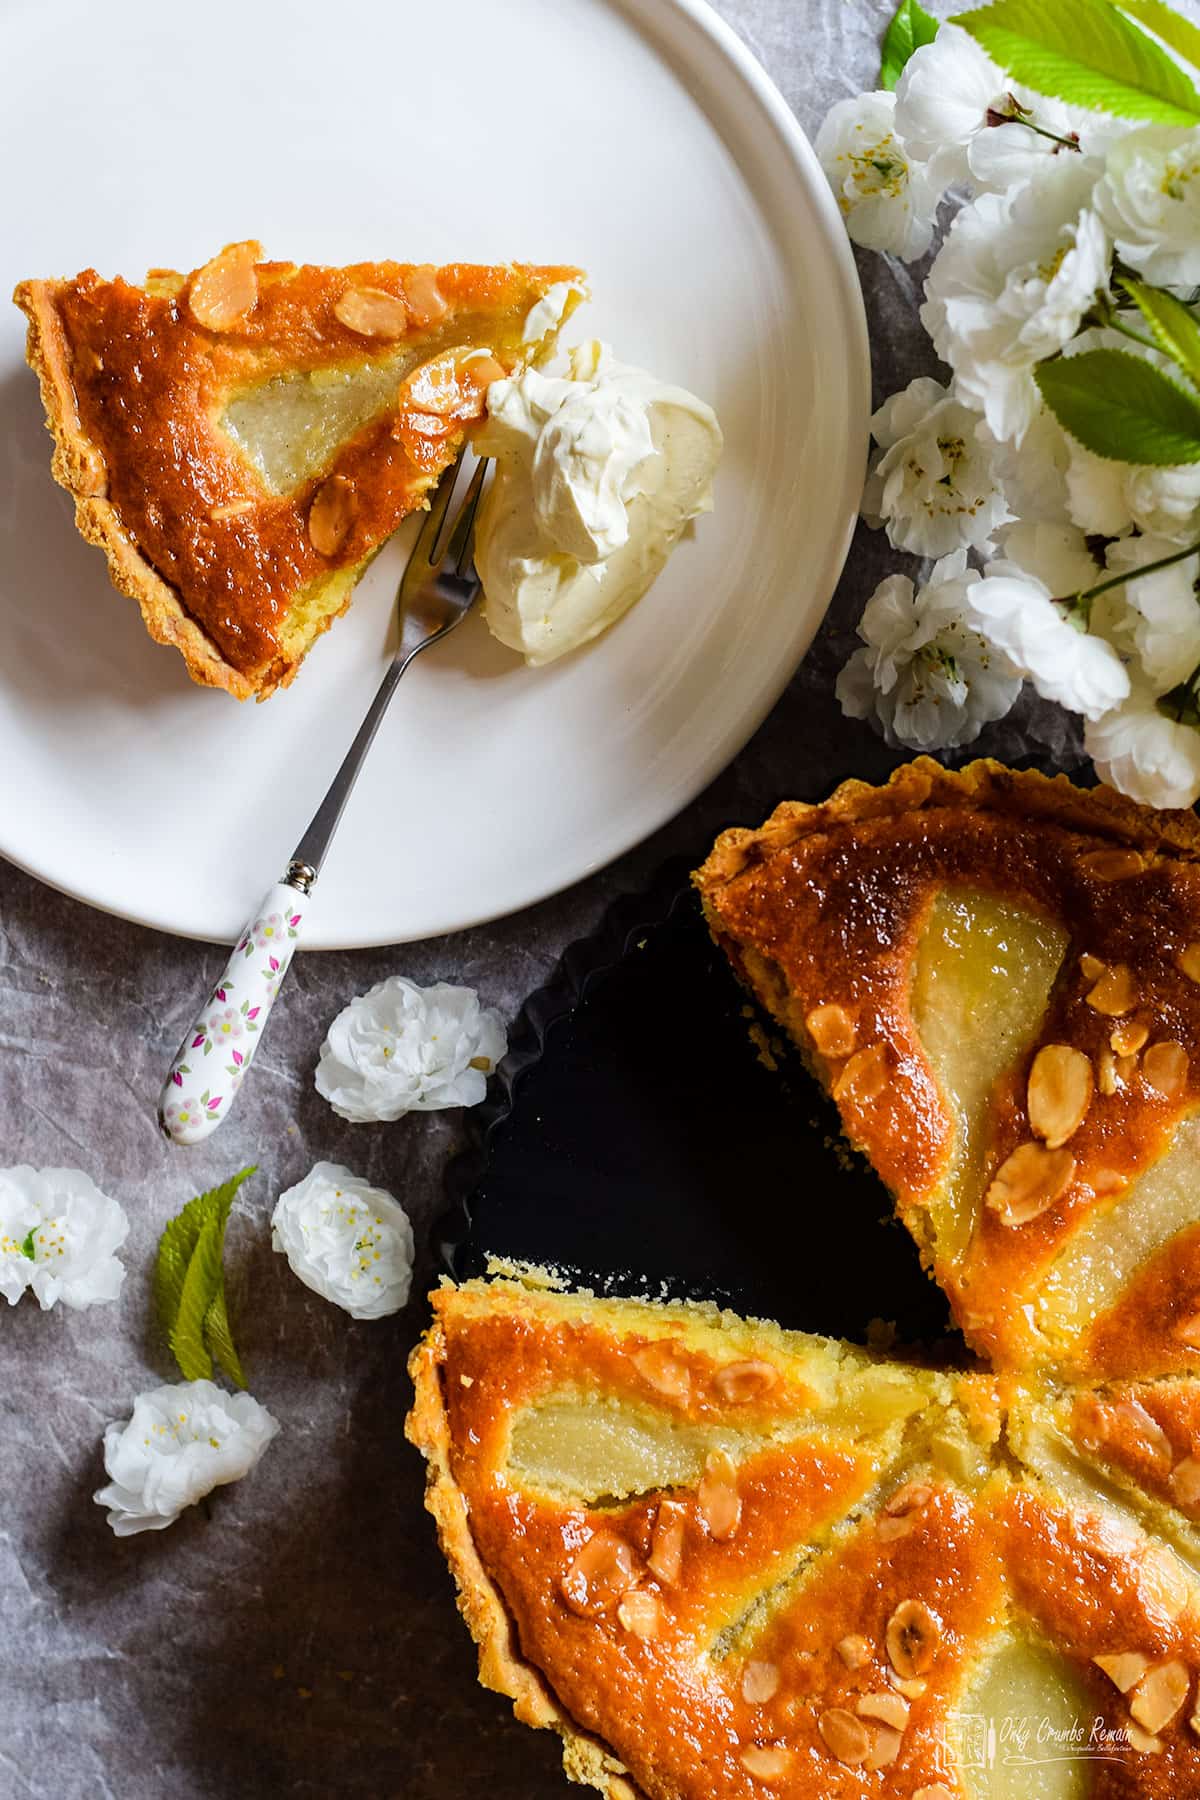 pear and almond tart with slice out on a plate served with a dollop of cream.